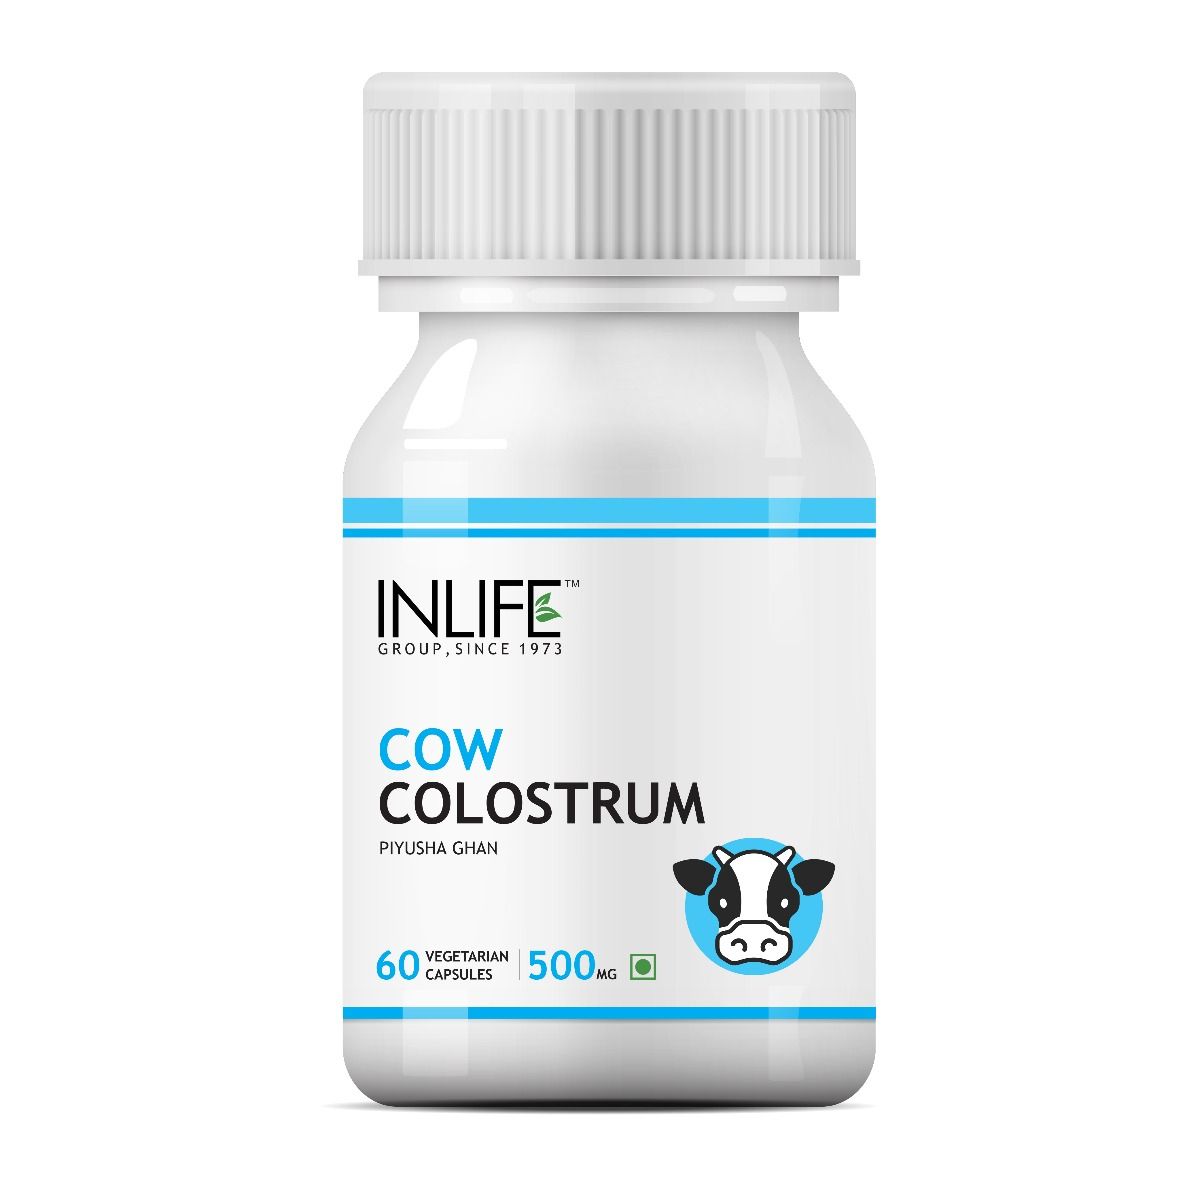 Inlife Cow Colostrum 500 mg, 60 Capsules, Pack of 1 